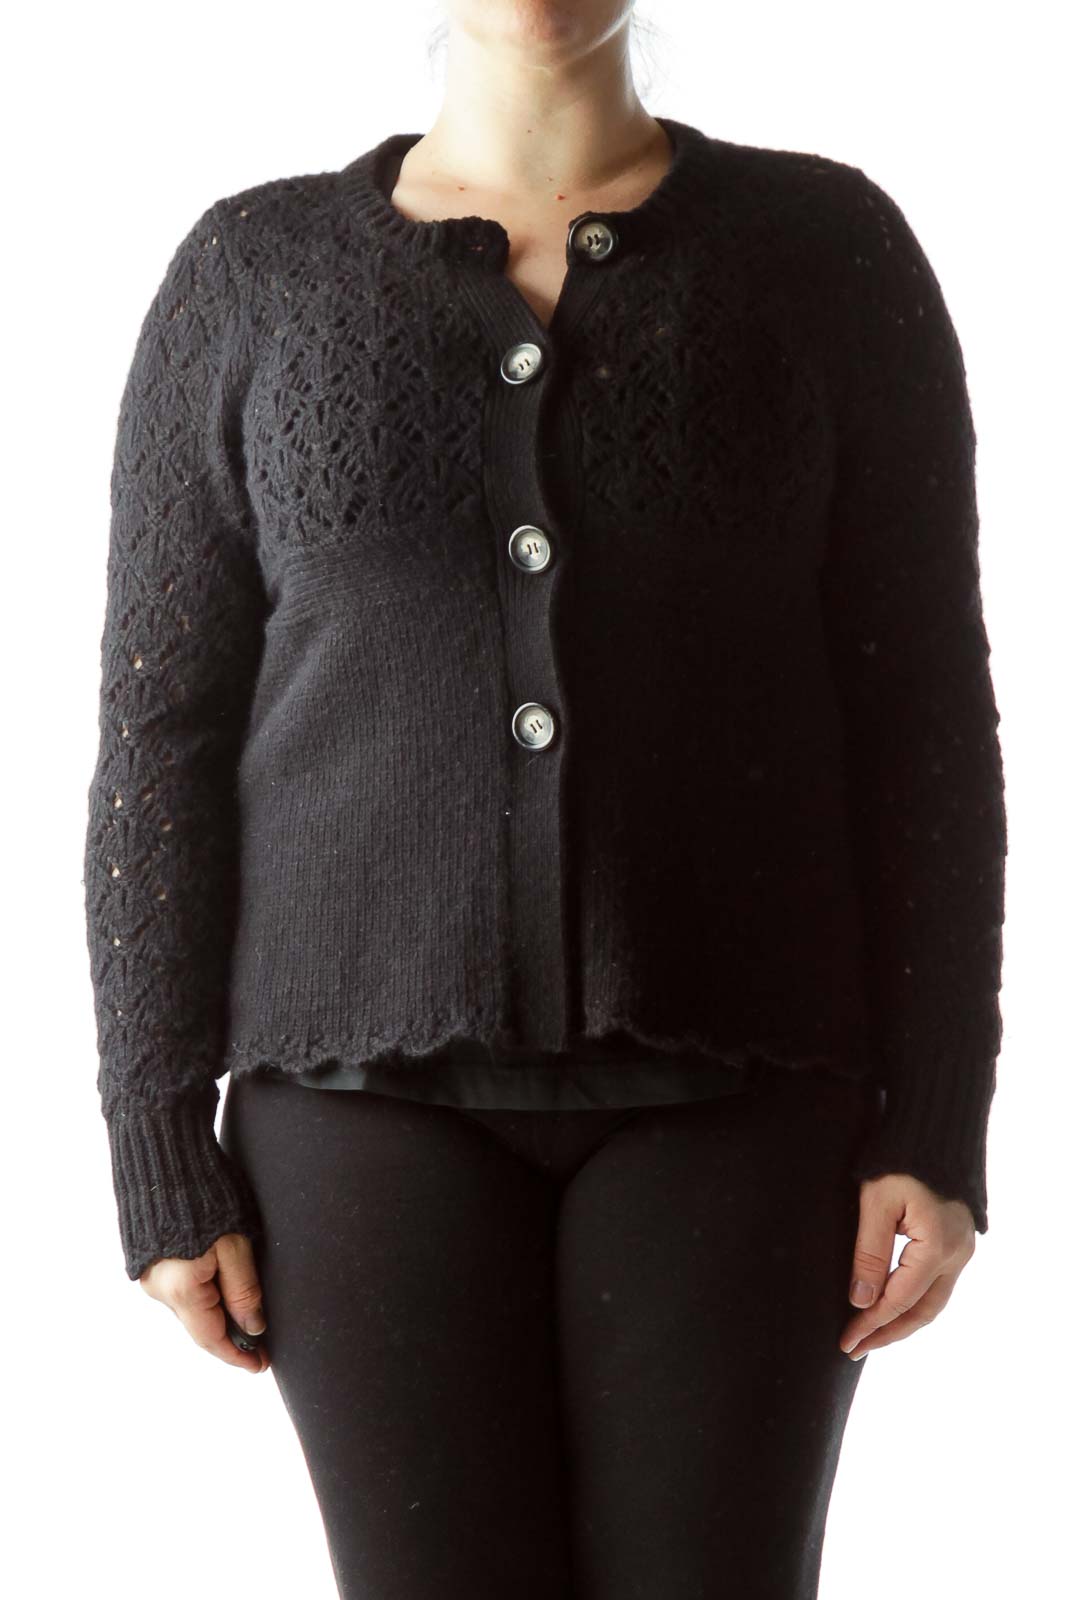 Black Knitted Long Sleeve Buttoned Soft Sweater Front